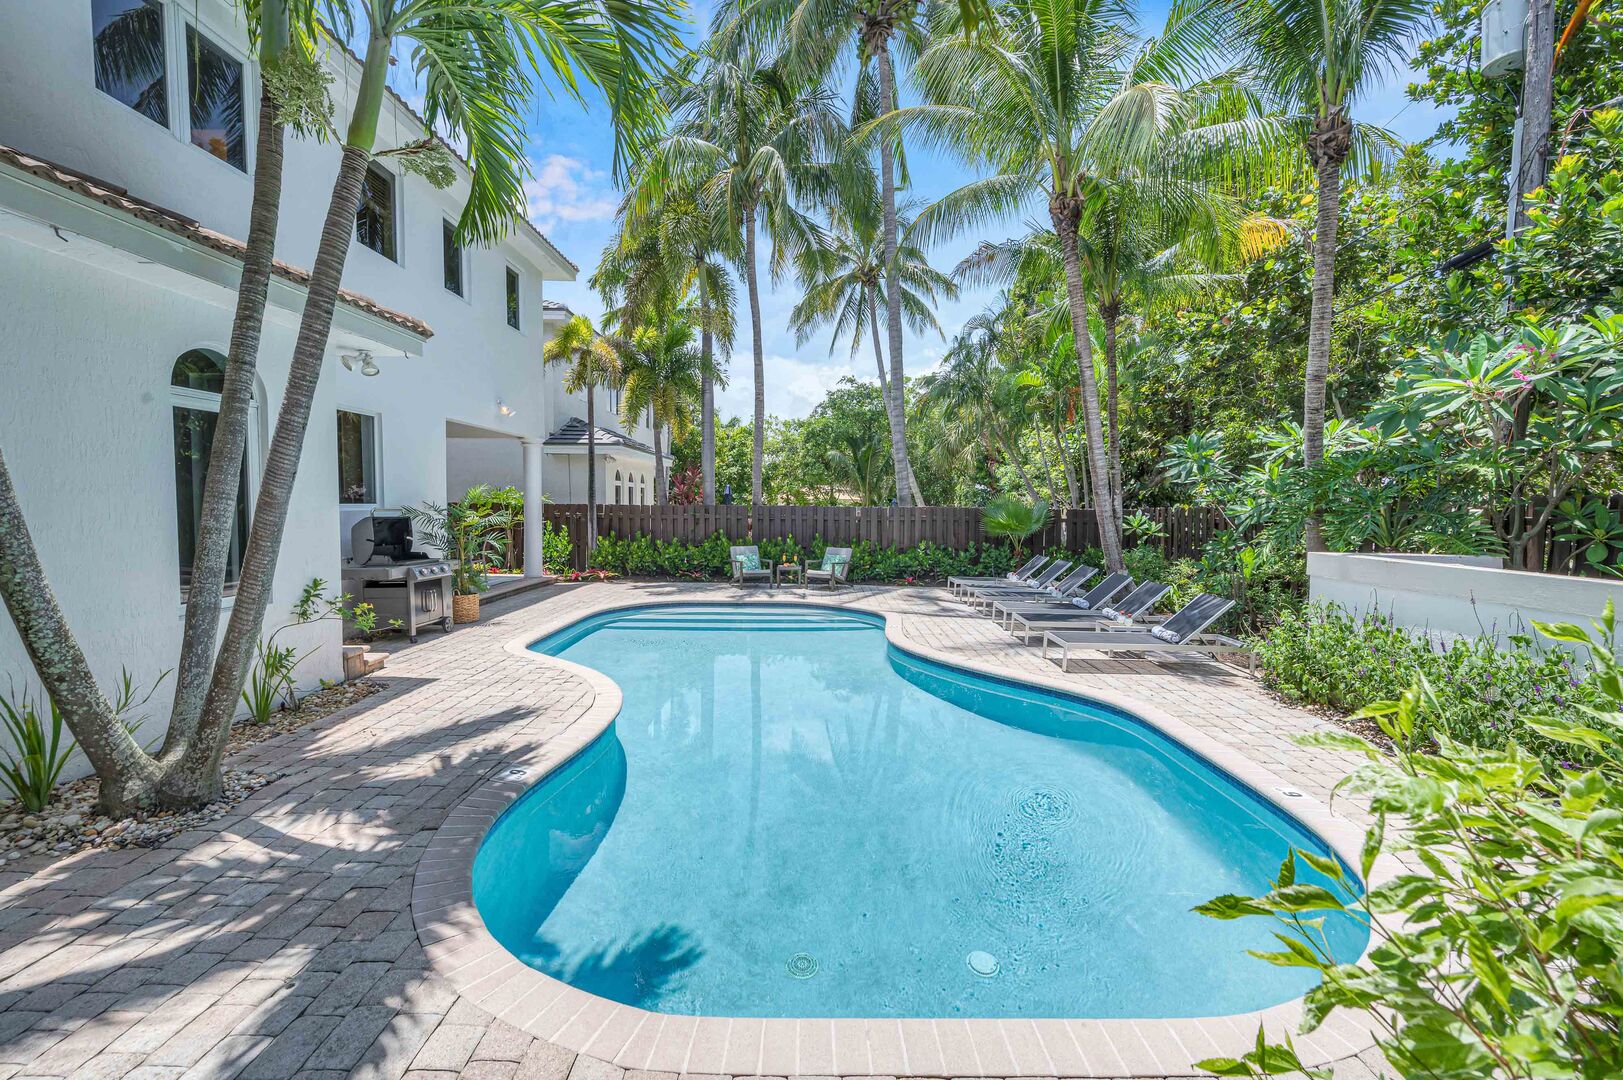 Dive into luxury and soak up the sun, just steps away from the beach in your own oasis with a heated pool.